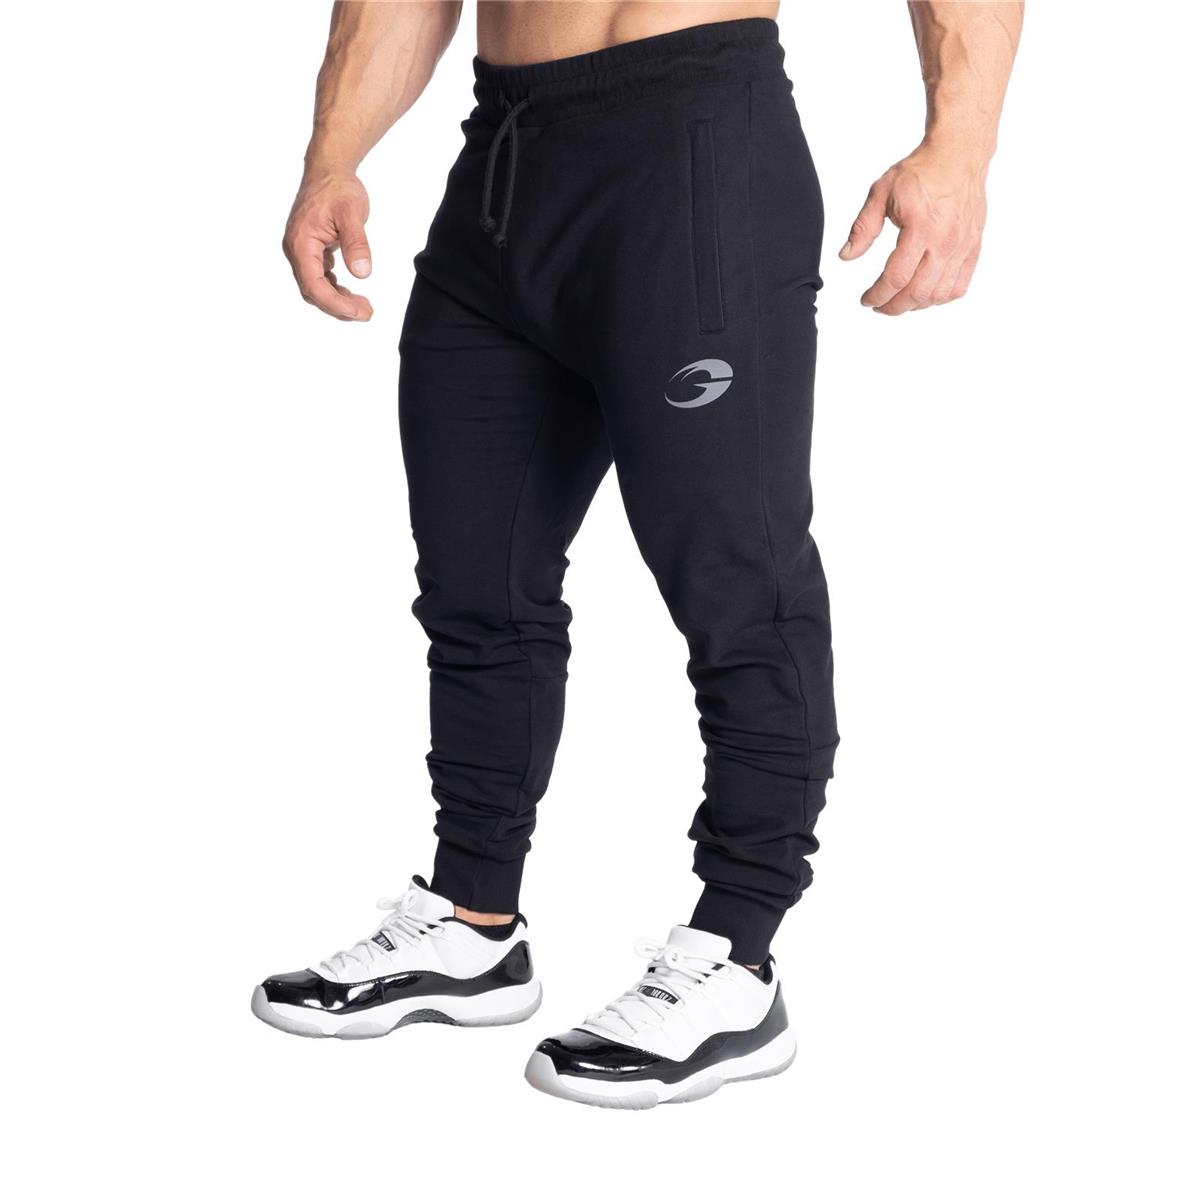 GASP Tapered joggers, Black